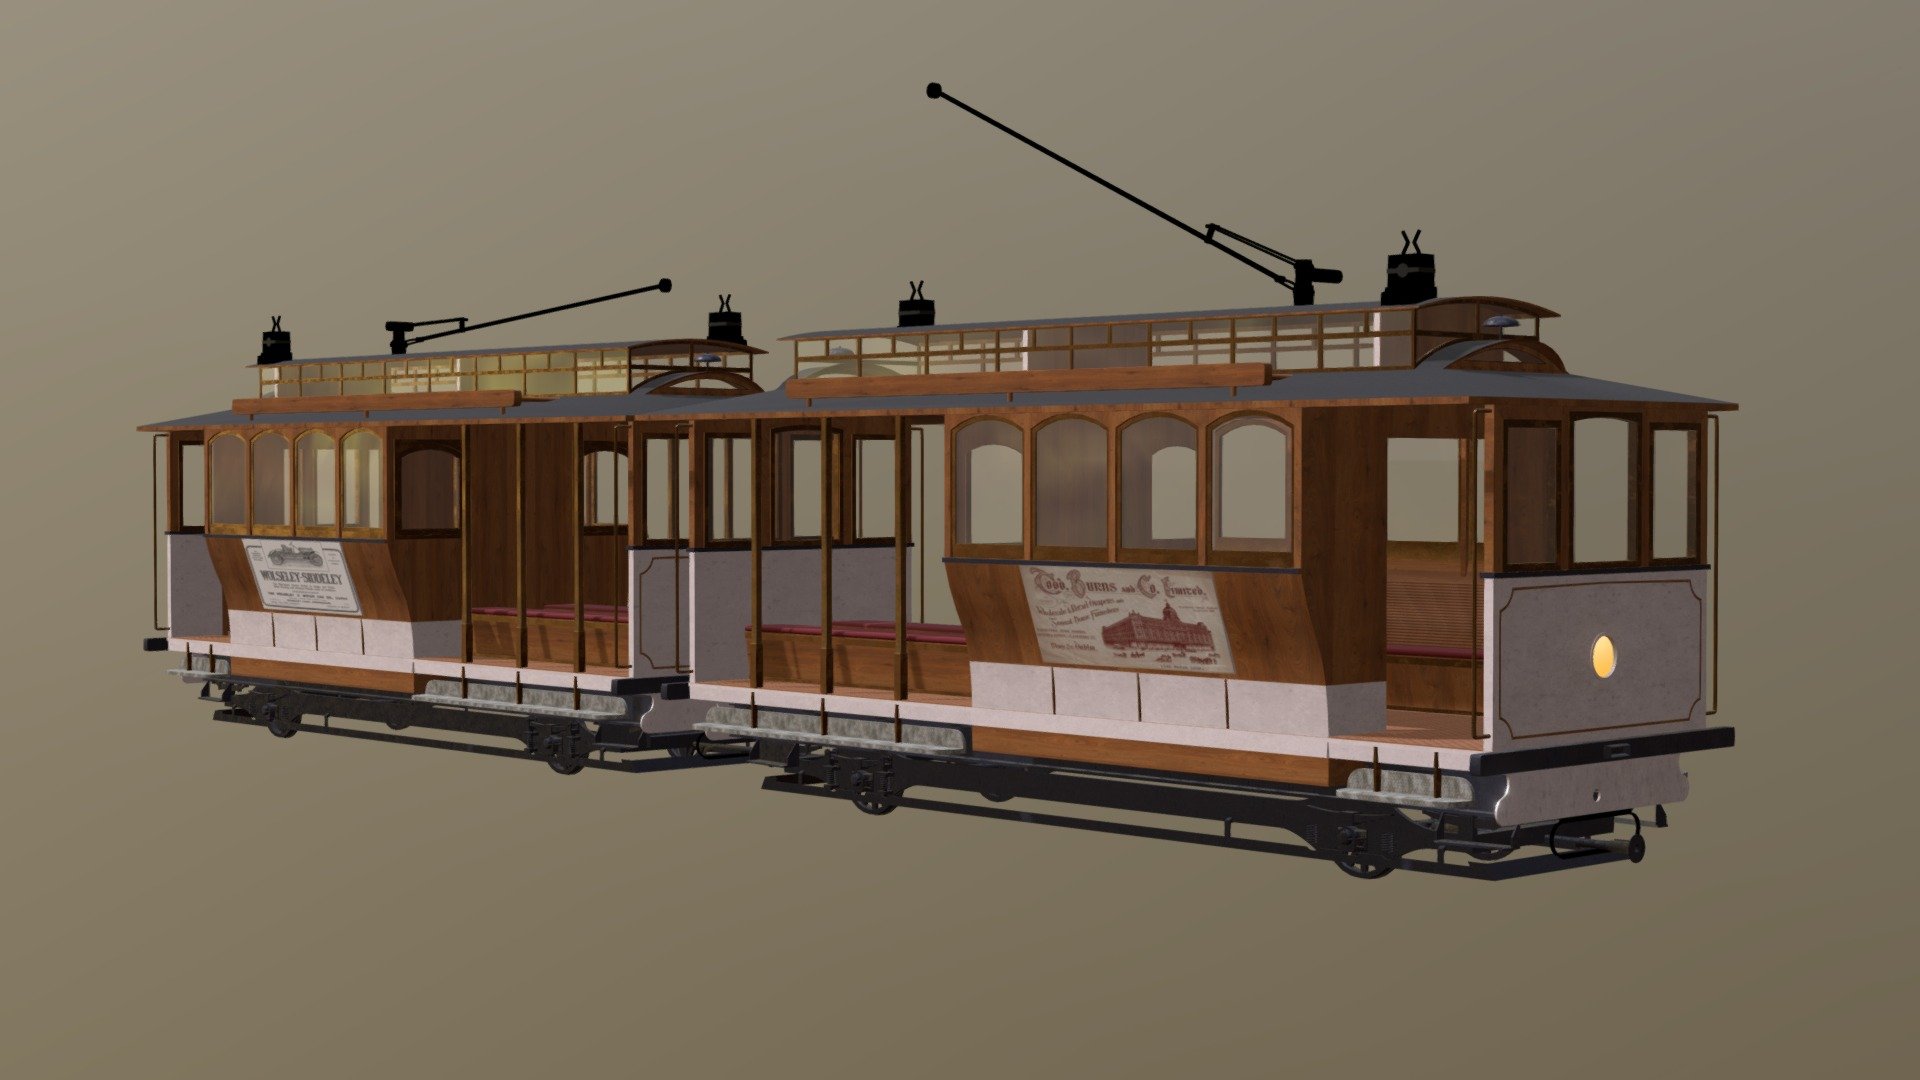 Tram vintage double

Game ready model for unreal, unity engine. For scenes, videos, games.
Wheels with origins for animations
2k PBR  textures in substance painter
gizmos ready - Tram vintage double - Buy Royalty Free 3D model by Thomas Binder (@bindertom61) 3d model